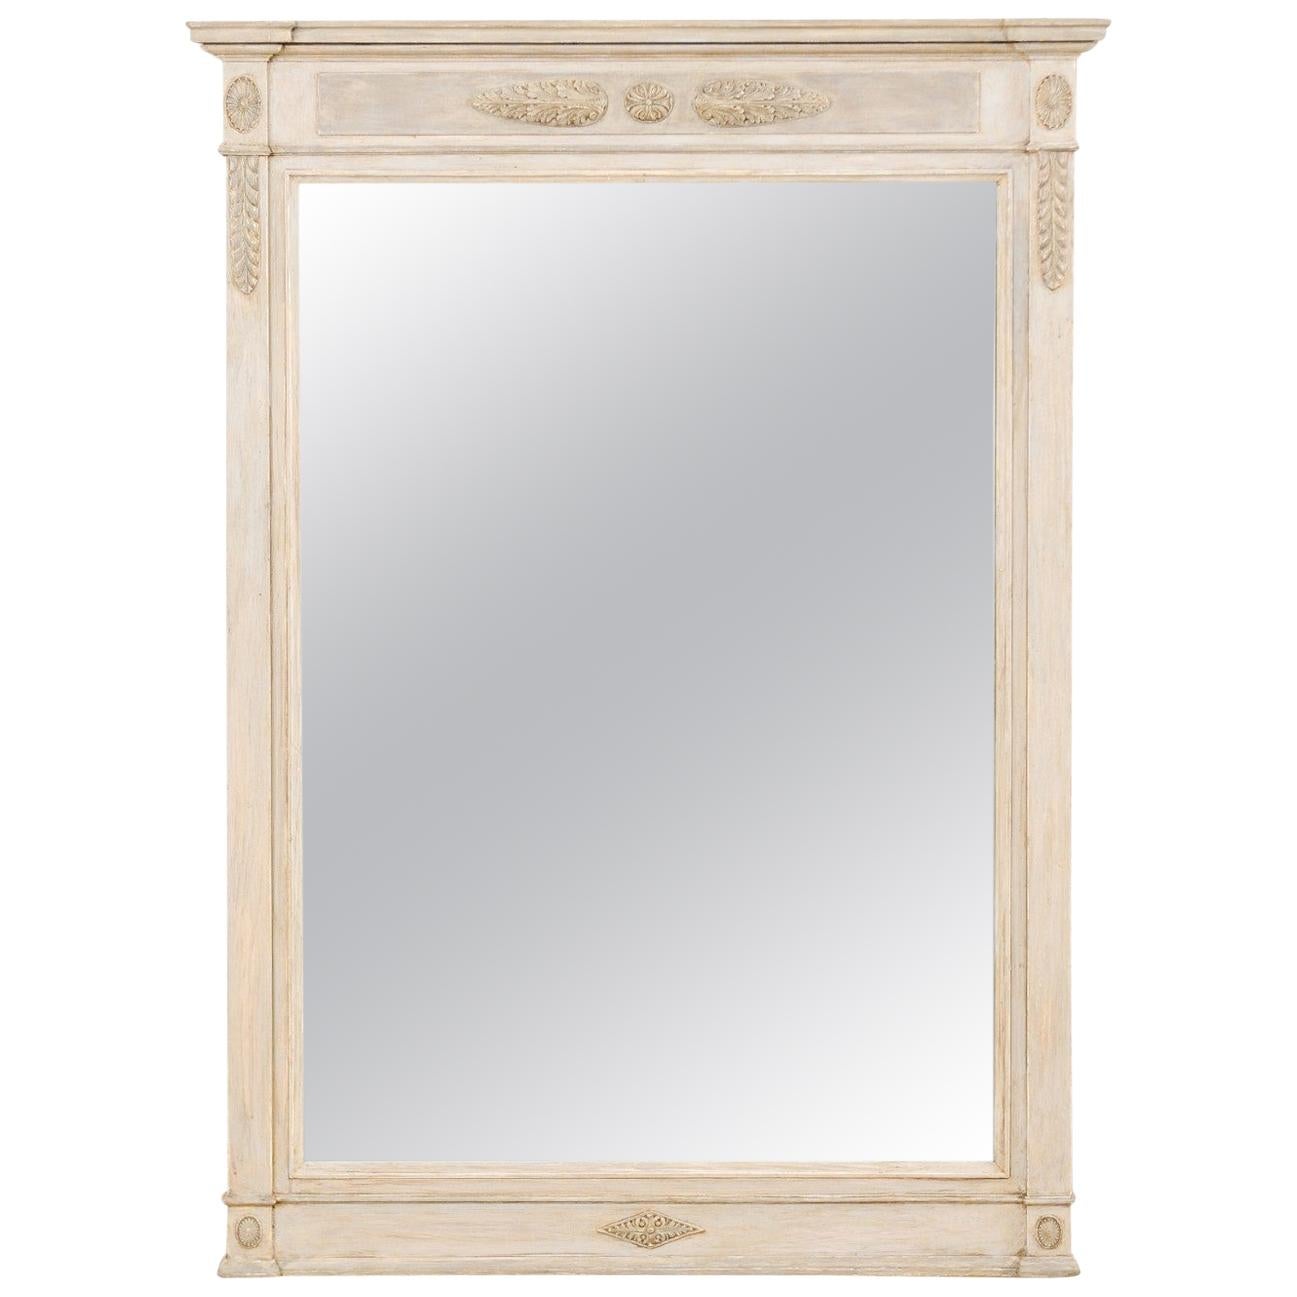 French Tall Carved Wood Mirror in Soft Grey Hues, Mid-20th Century